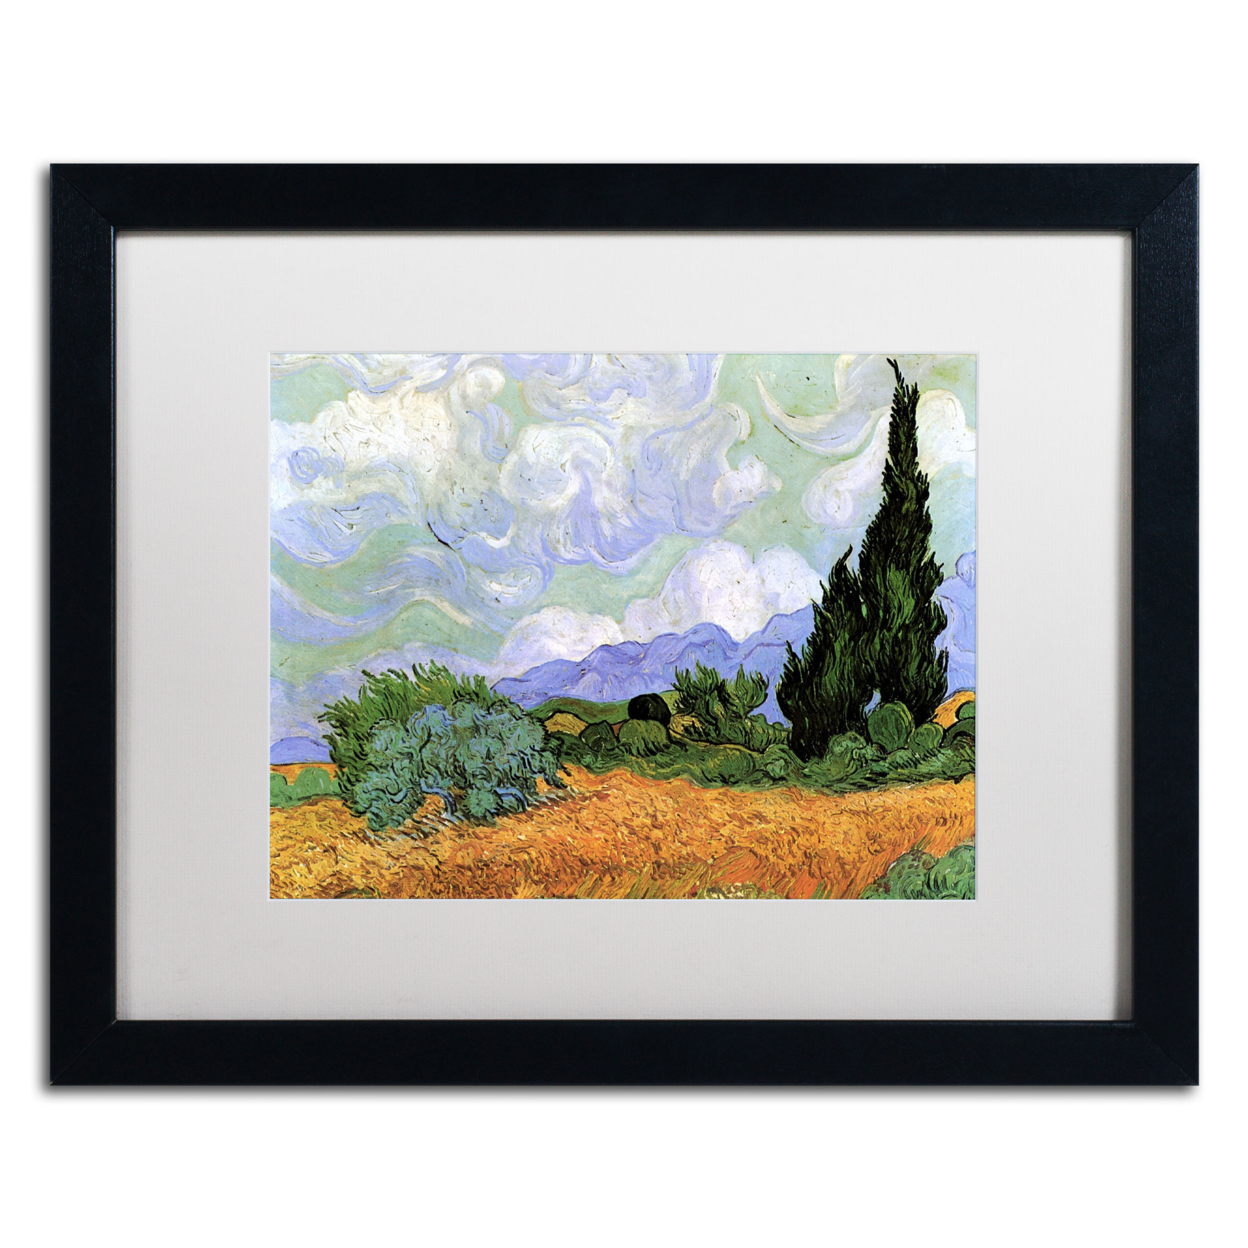 Vincent Van Gogh 'Wheatfield With Cypresses 1889' Black Wooden Framed Art 18 X 22 Inches